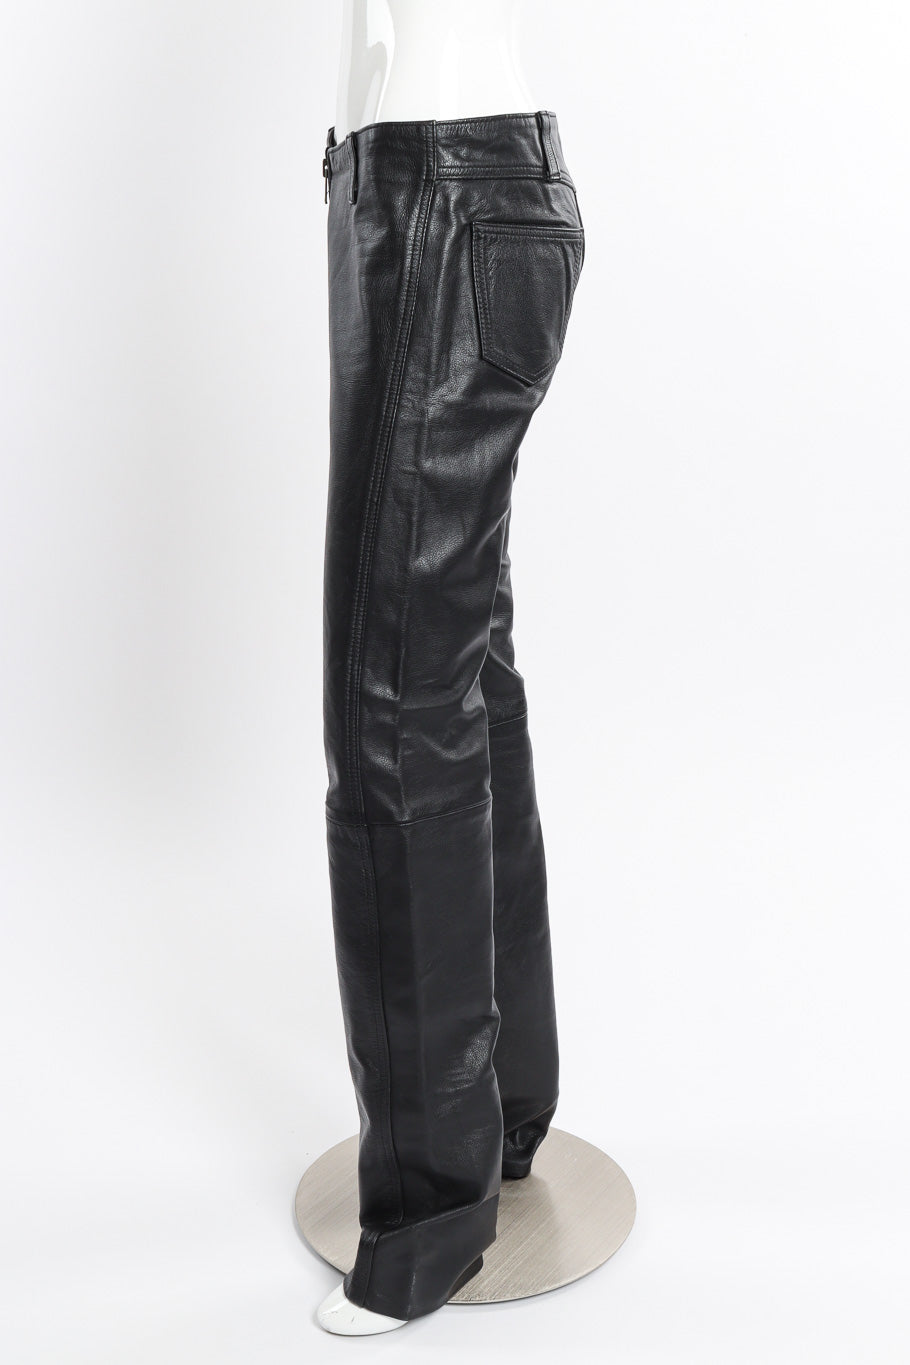 Vintage Stormy Leather Zipper Rise Leather Pant side view on mannequin @recessla